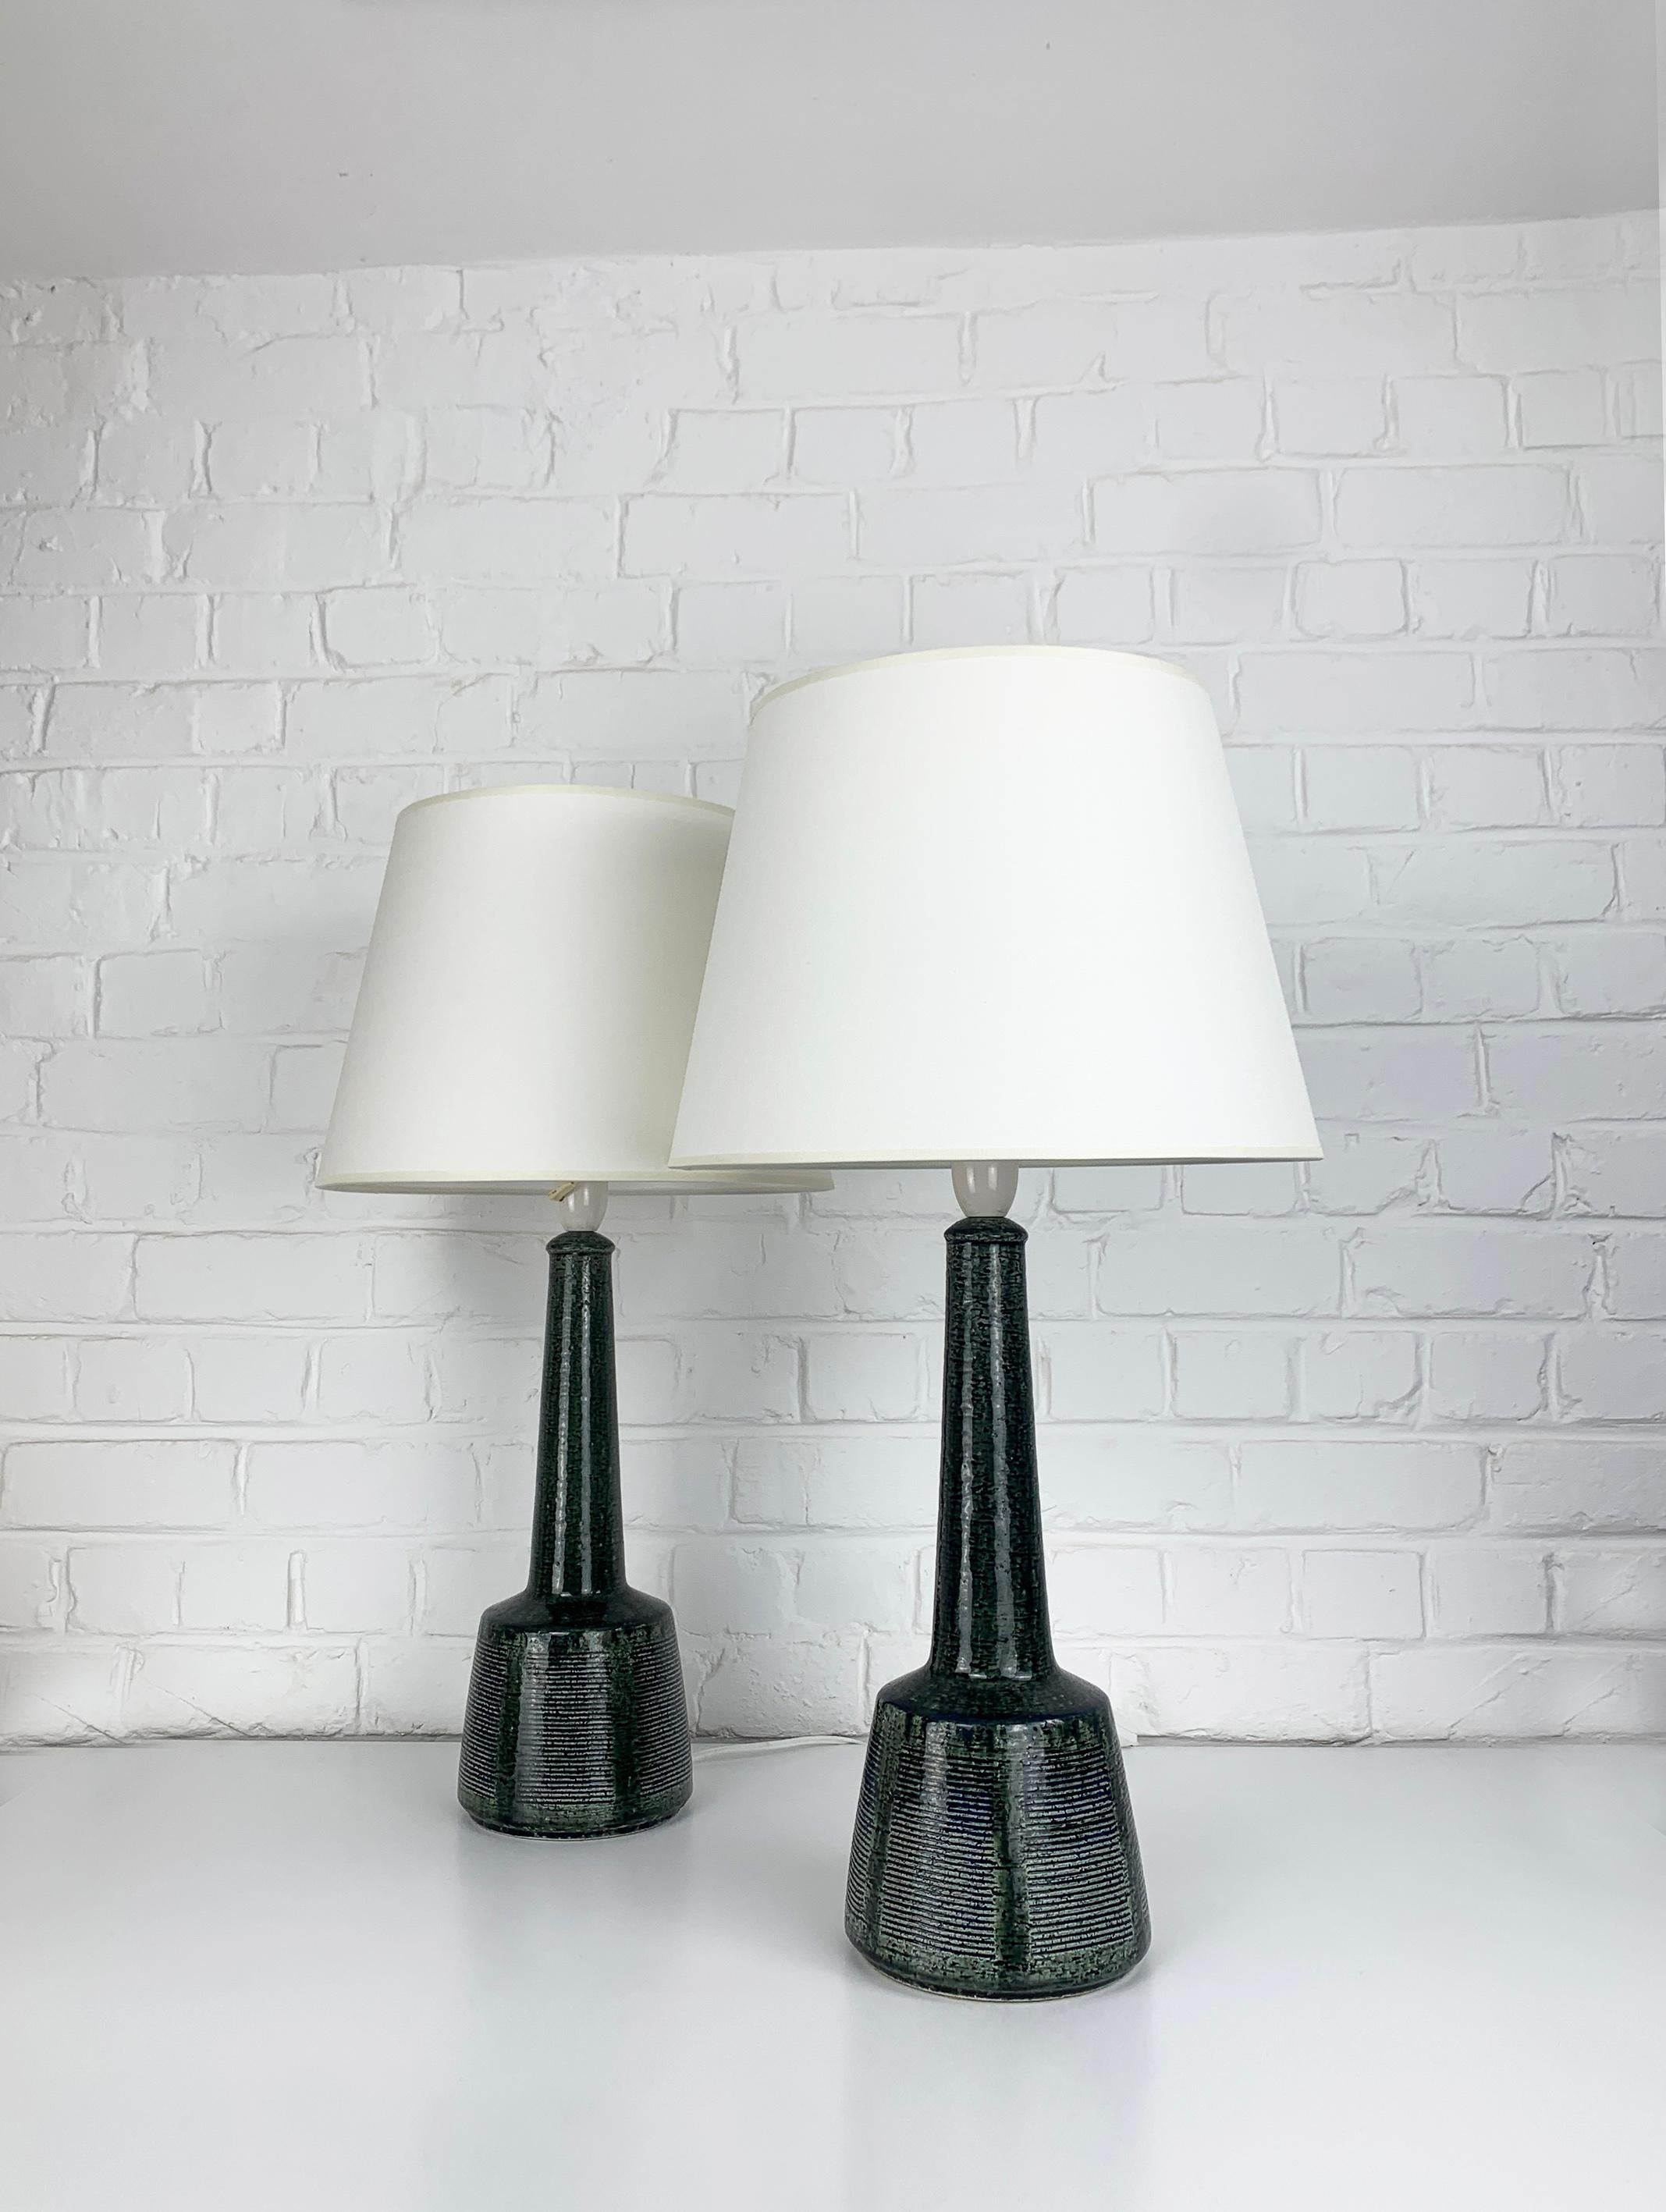 Hand-Crafted Pair of Tall Ceramic table lamps by Palshus, design by Esben Klint for Le Klint